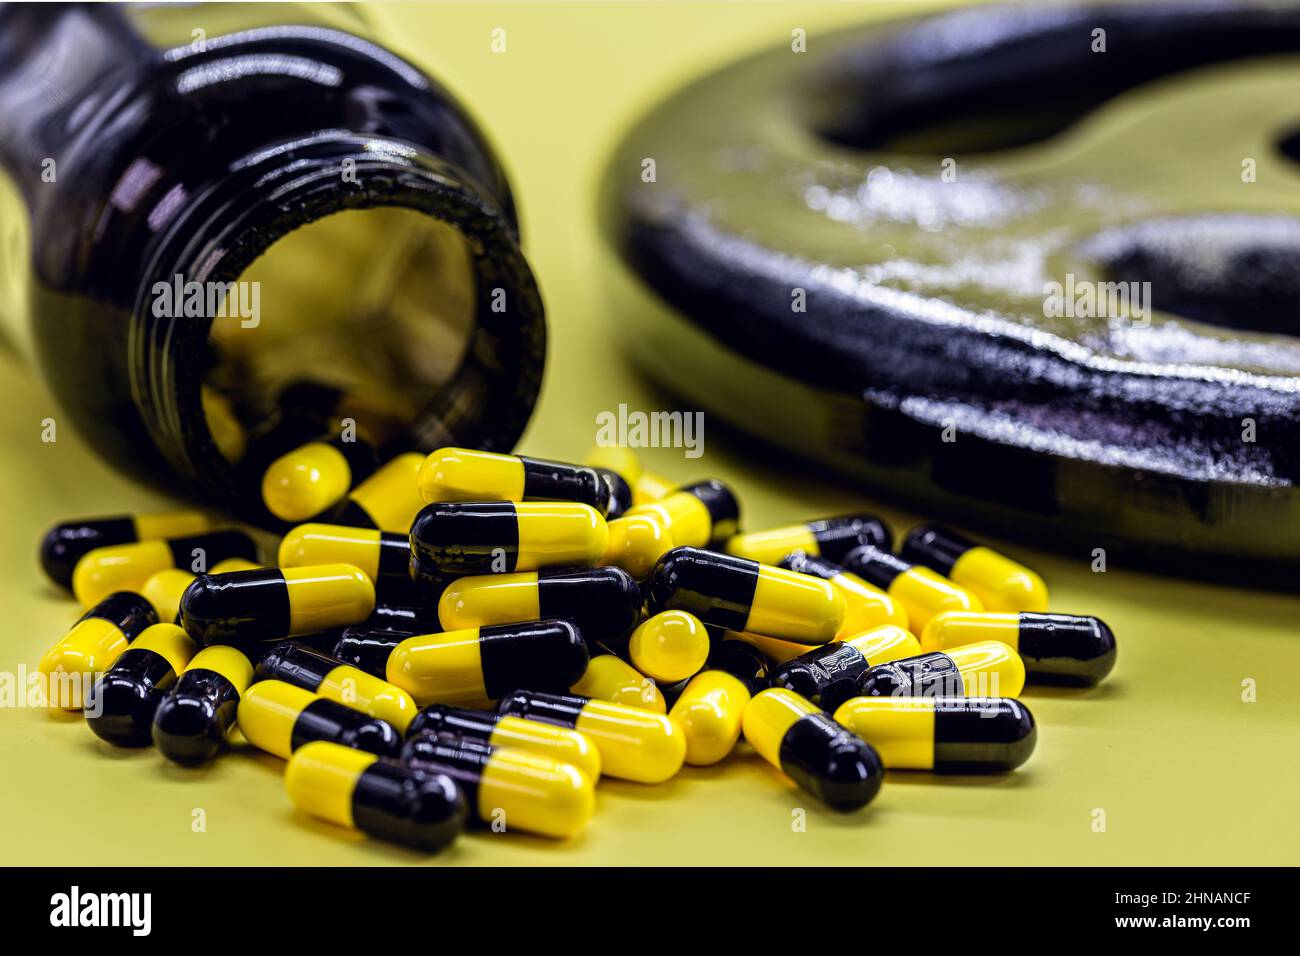 casein or caffeine food supplement capsules for bodybuilding and physical activities, with dumbbells in the background of vibrant yellow color Stock Photo